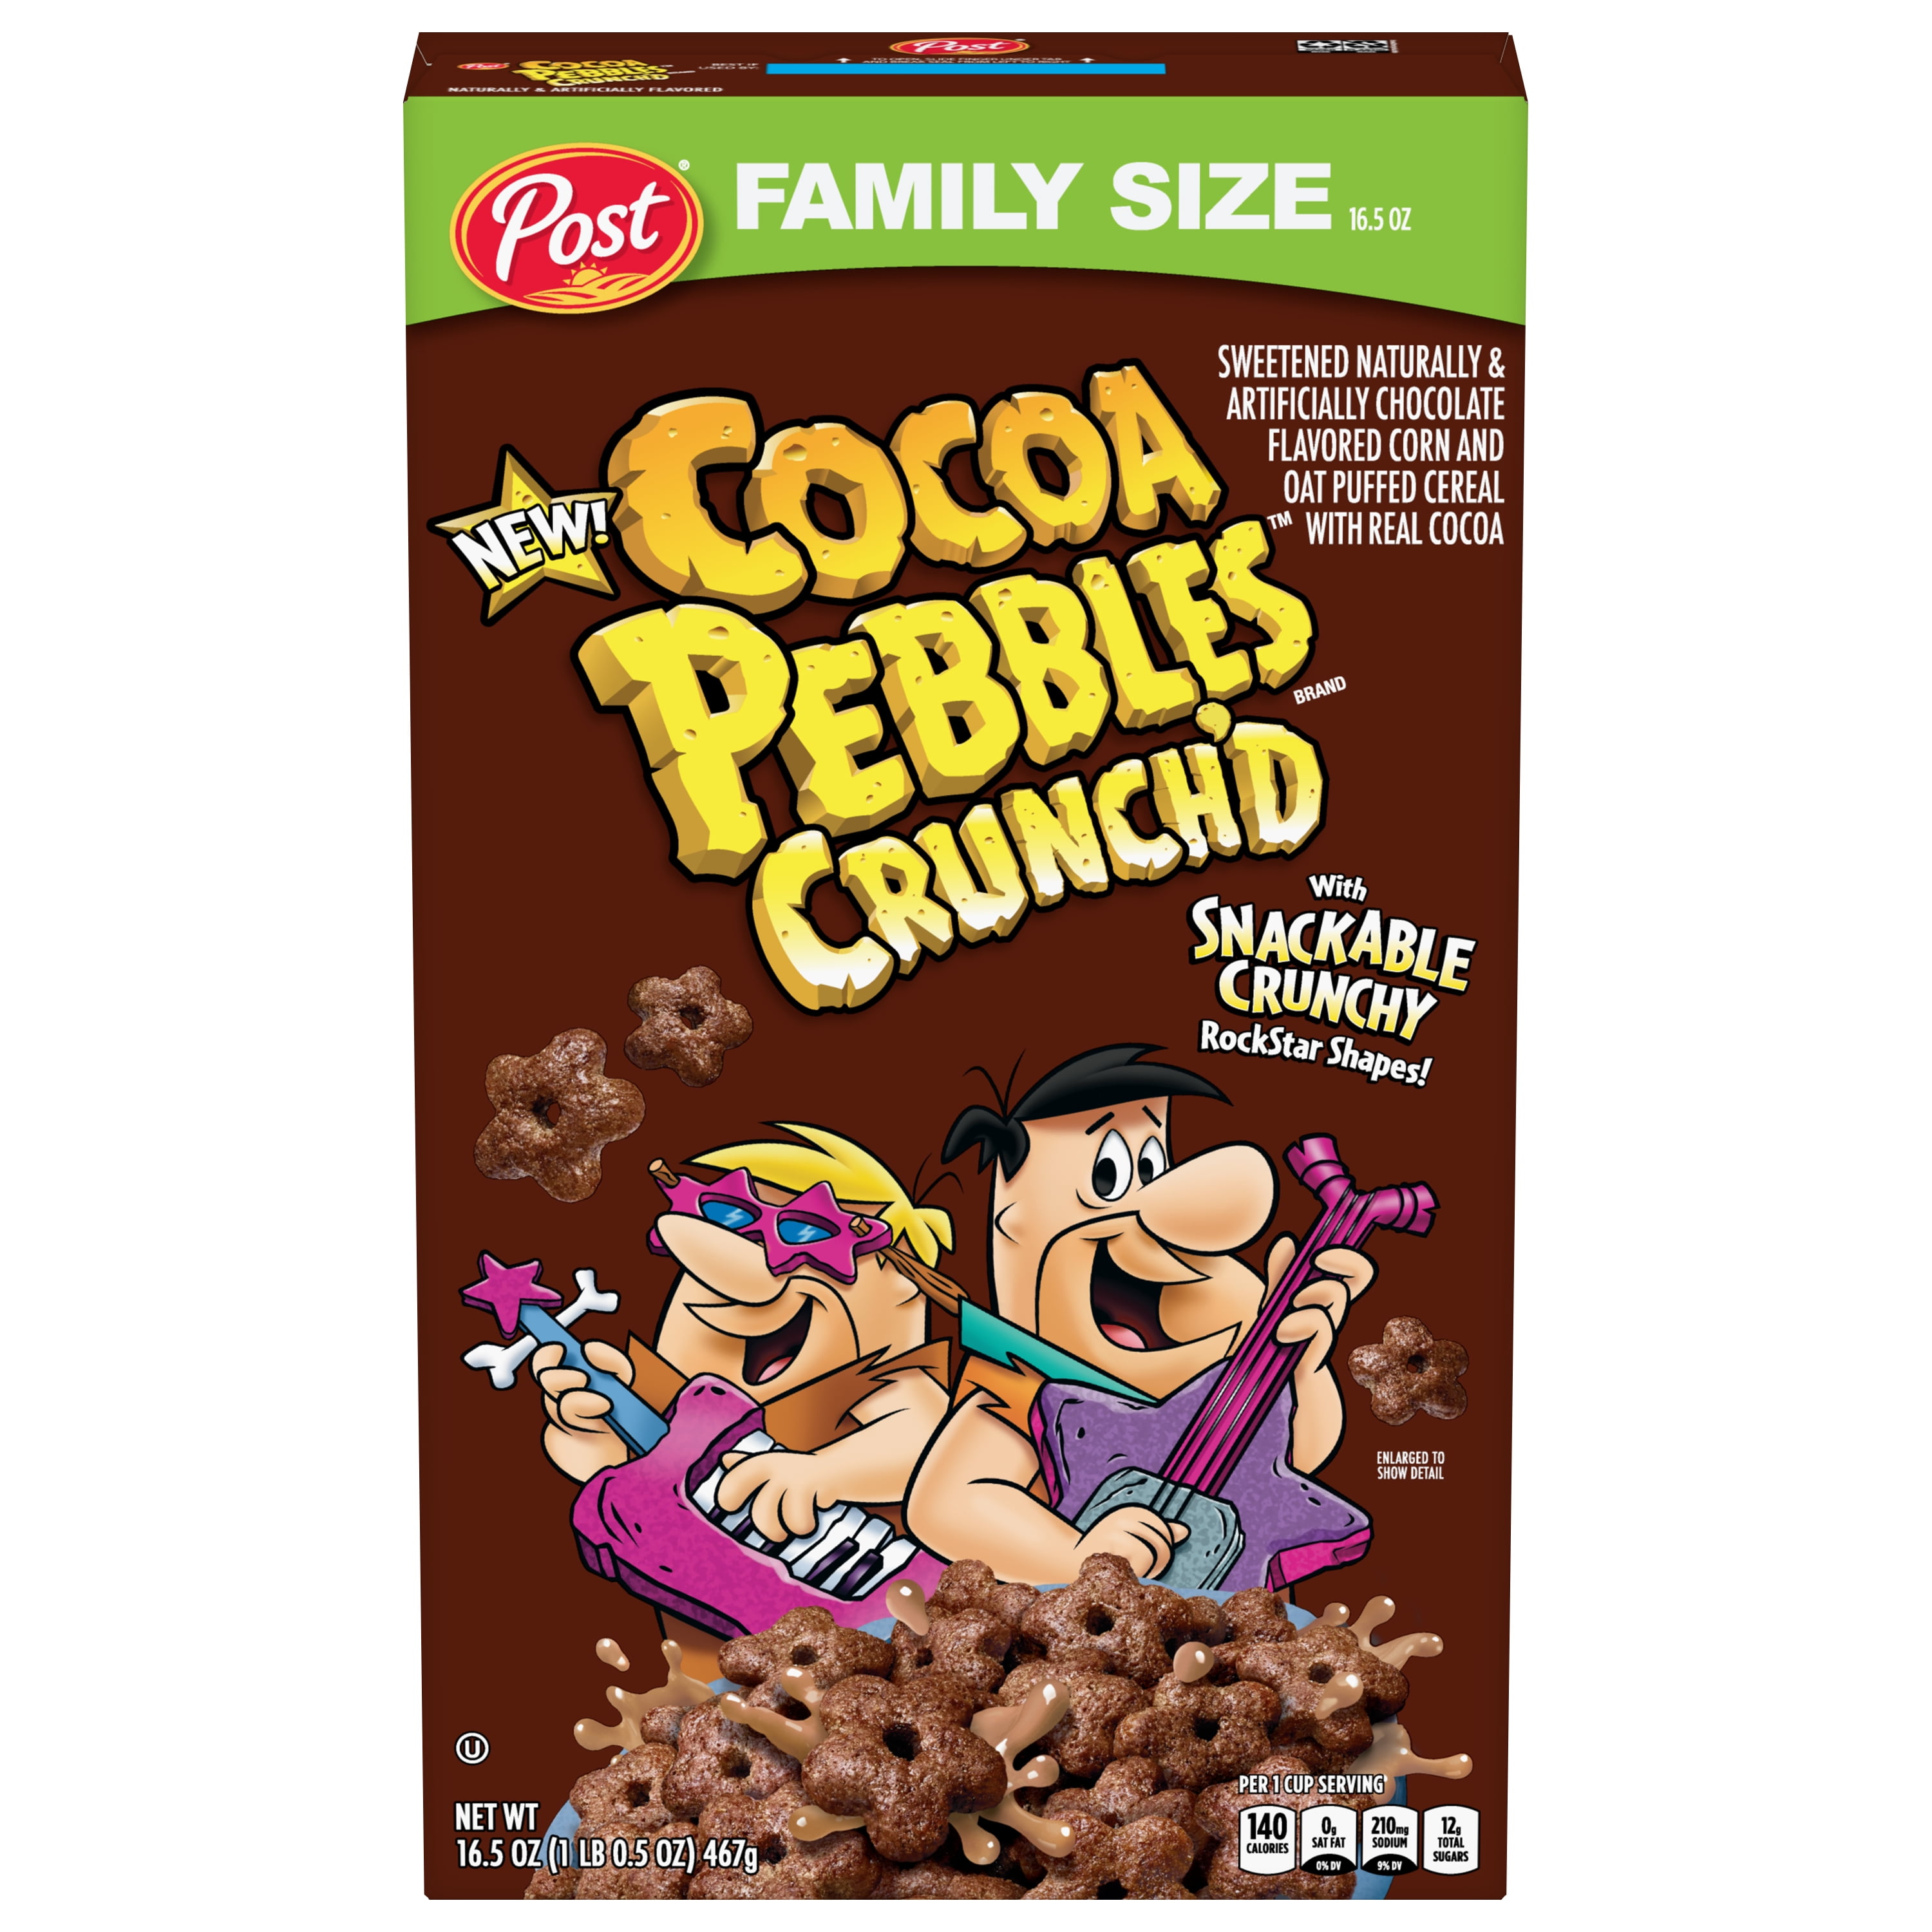 Post Cocoa PEBBLES Crunch'D Breakfast Cereal, Chocolatey Family Size Cereal, 16.5 OZ Box